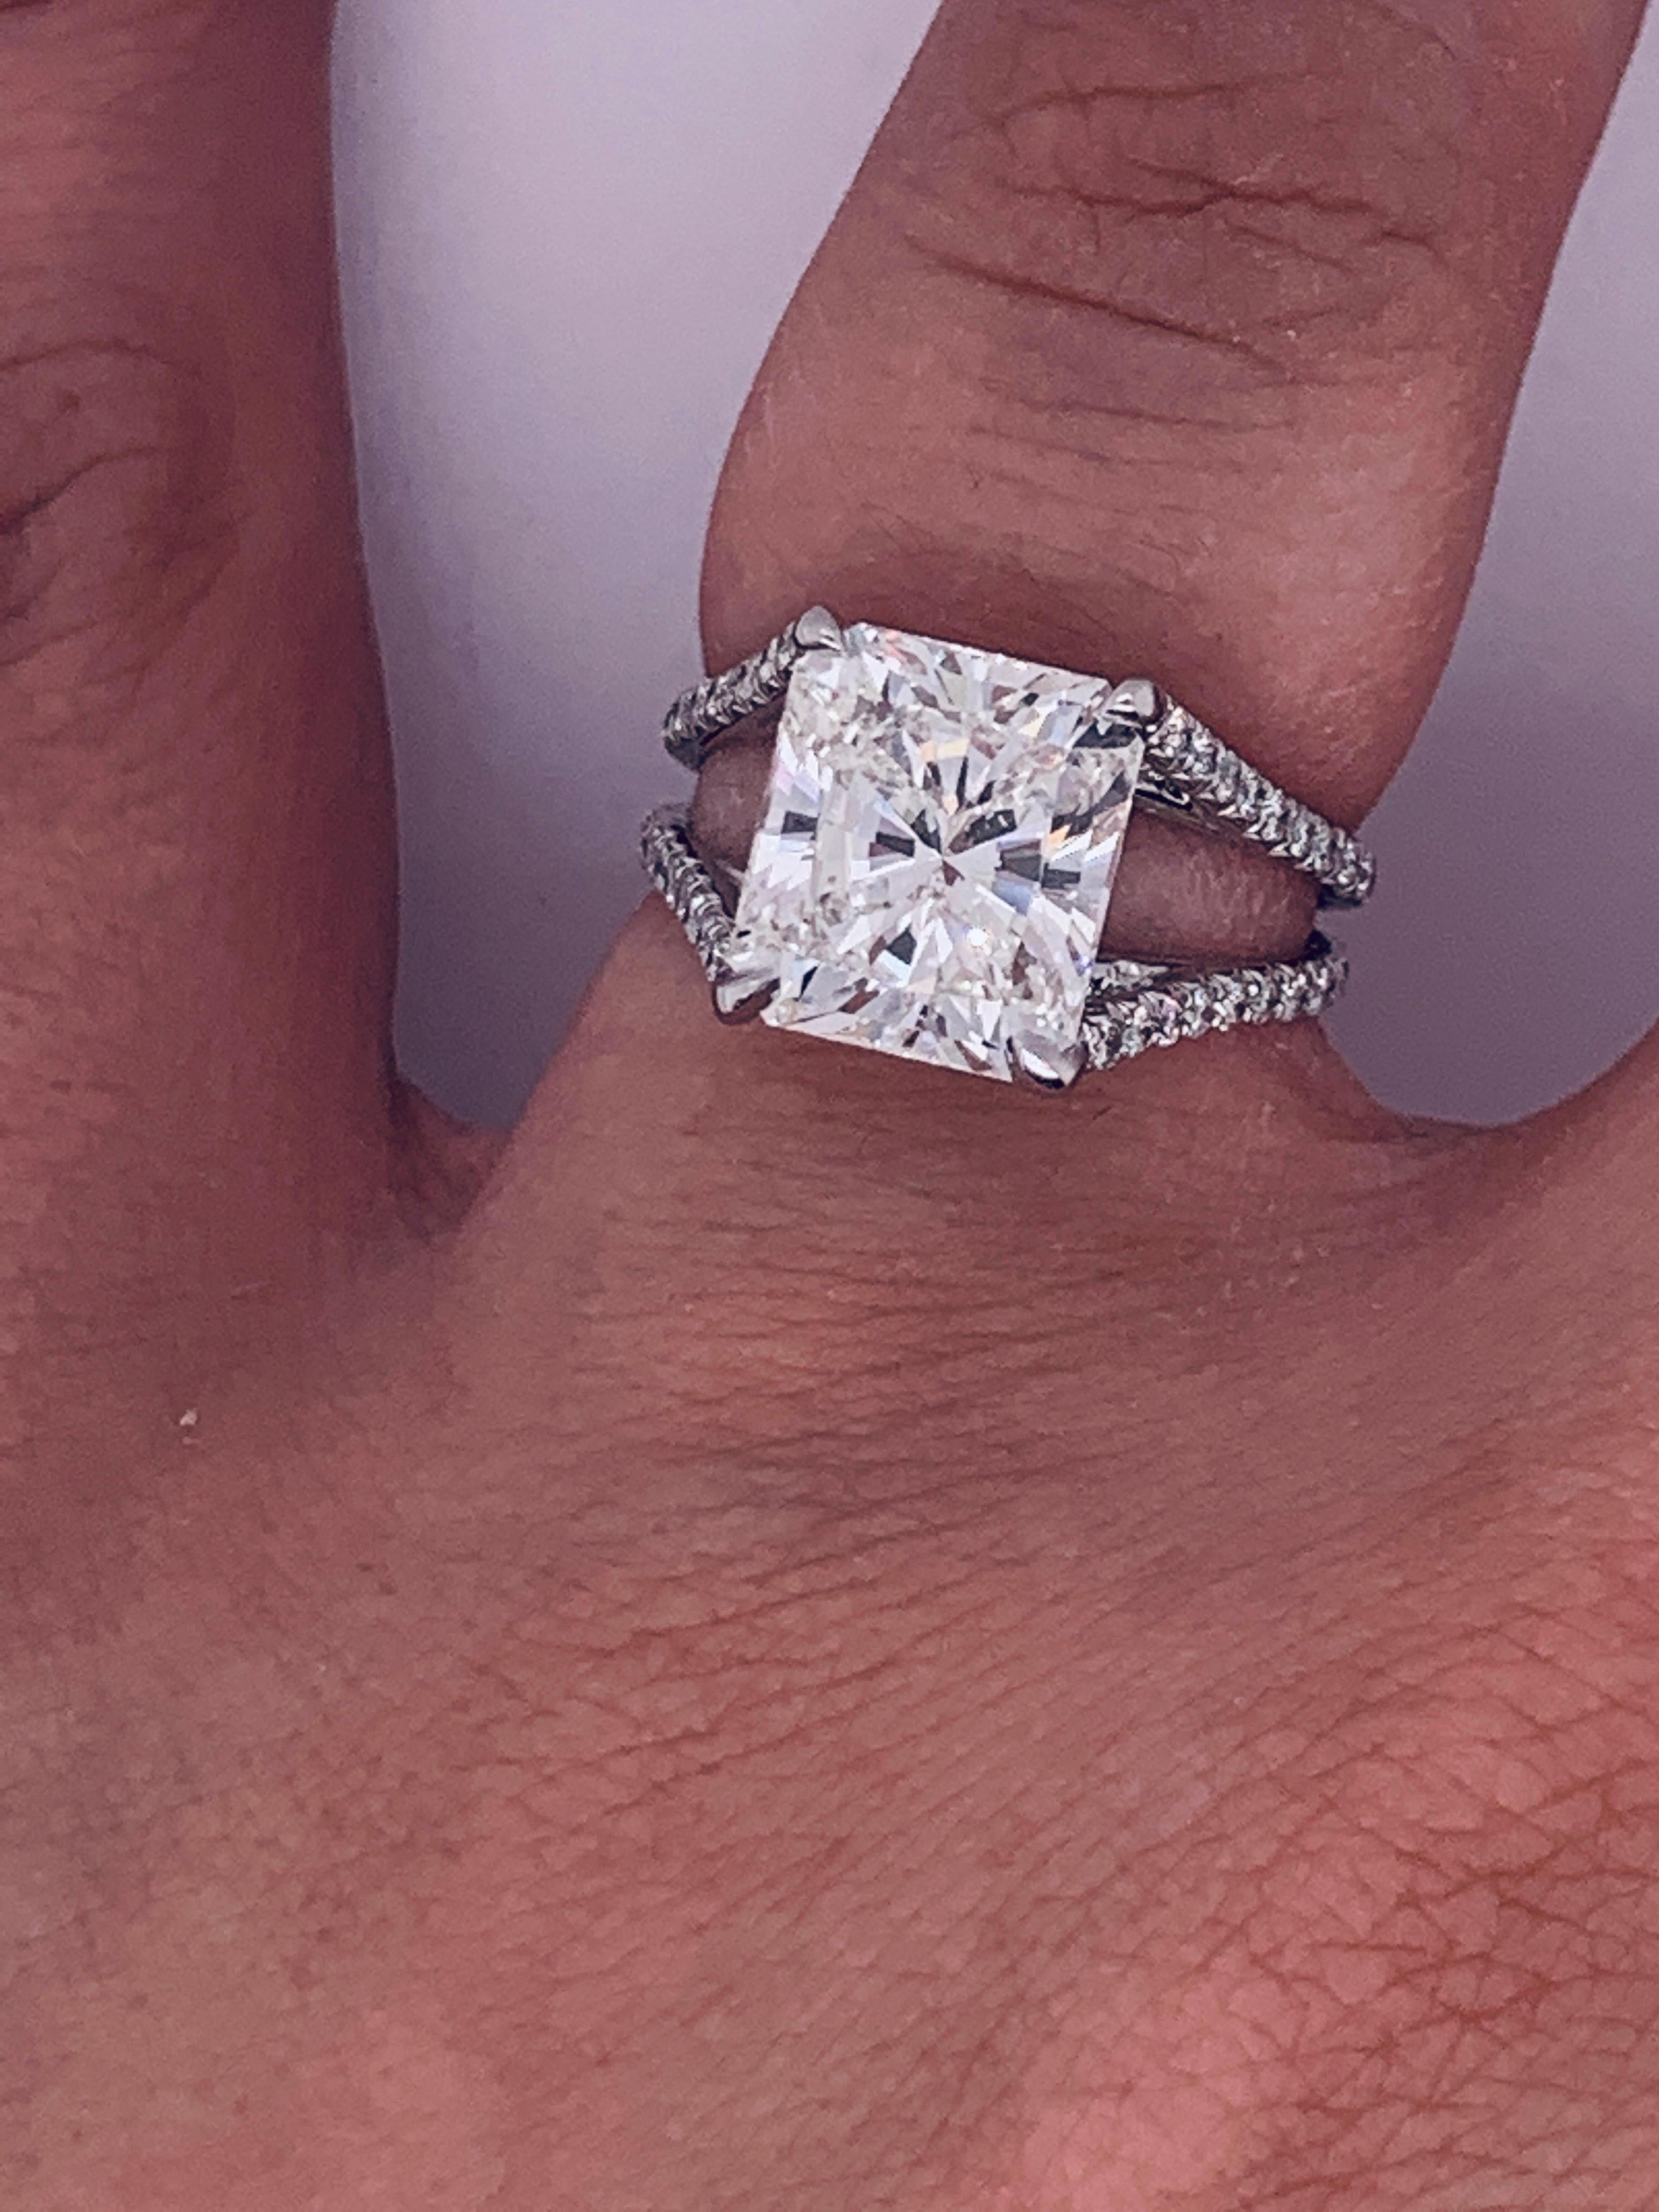 Magnificent GIA certified diamond engagement ring with Ideal proportion Radiant cut diamond in the center, weighing 4.18 carats J color Internally Flawless  in clarity, surrounded by 1.00 carat of round brilliant cut diamonds. Platinum.
Comes with